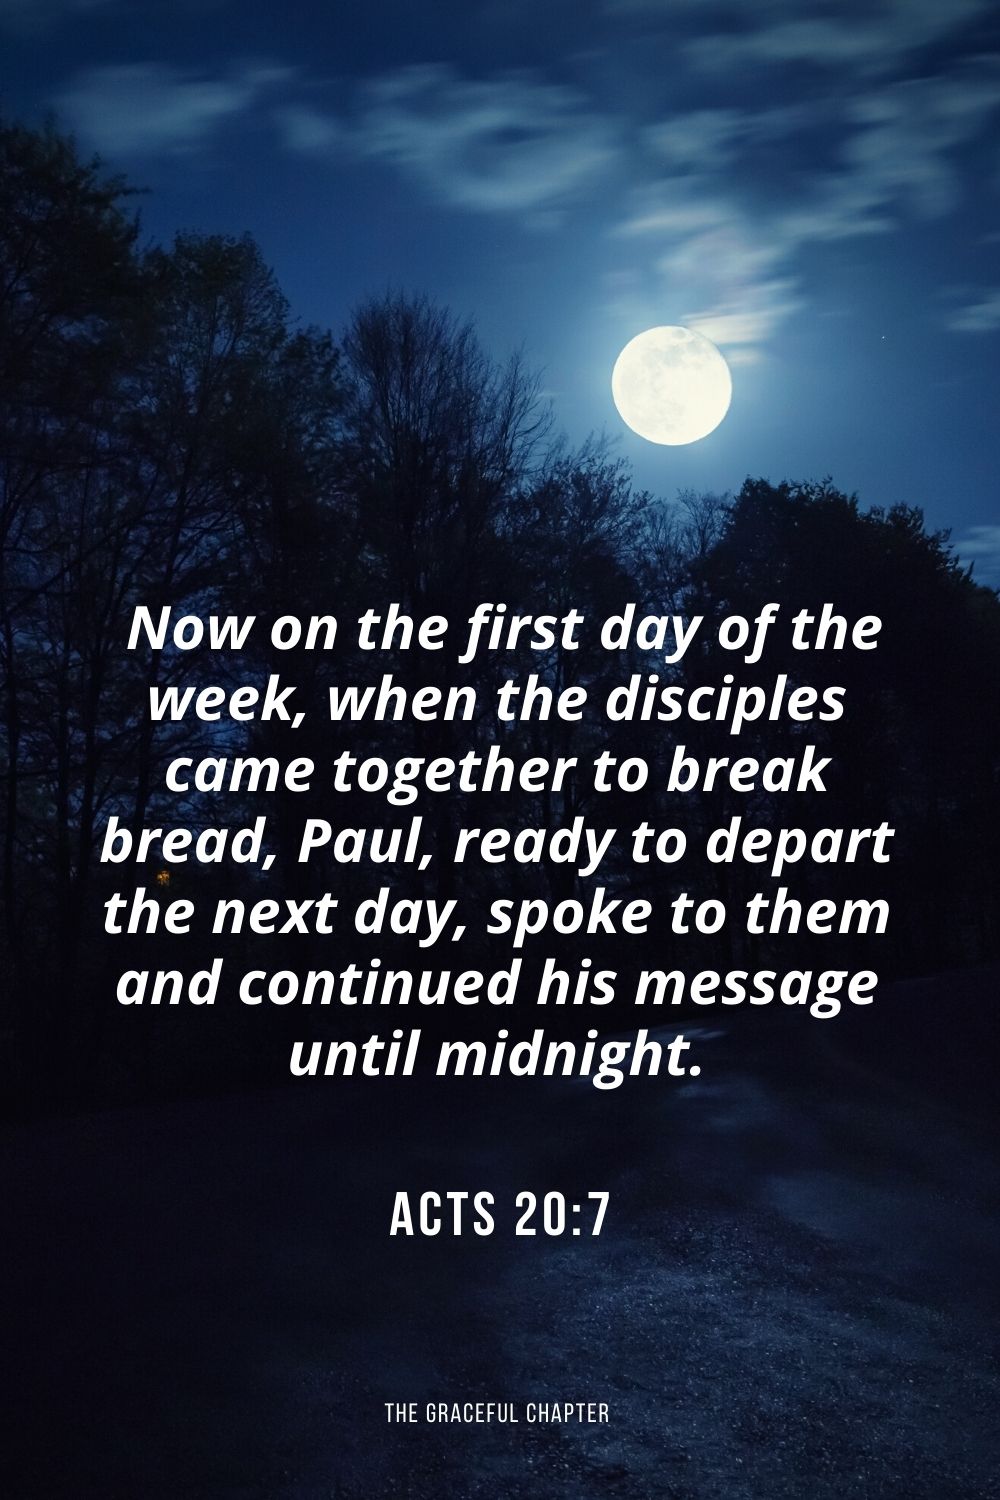  Now on the first day of the week, when the disciples came together to break bread, Paul, ready to depart the next day, spoke to them and continued his message until midnight. Acts 20:7